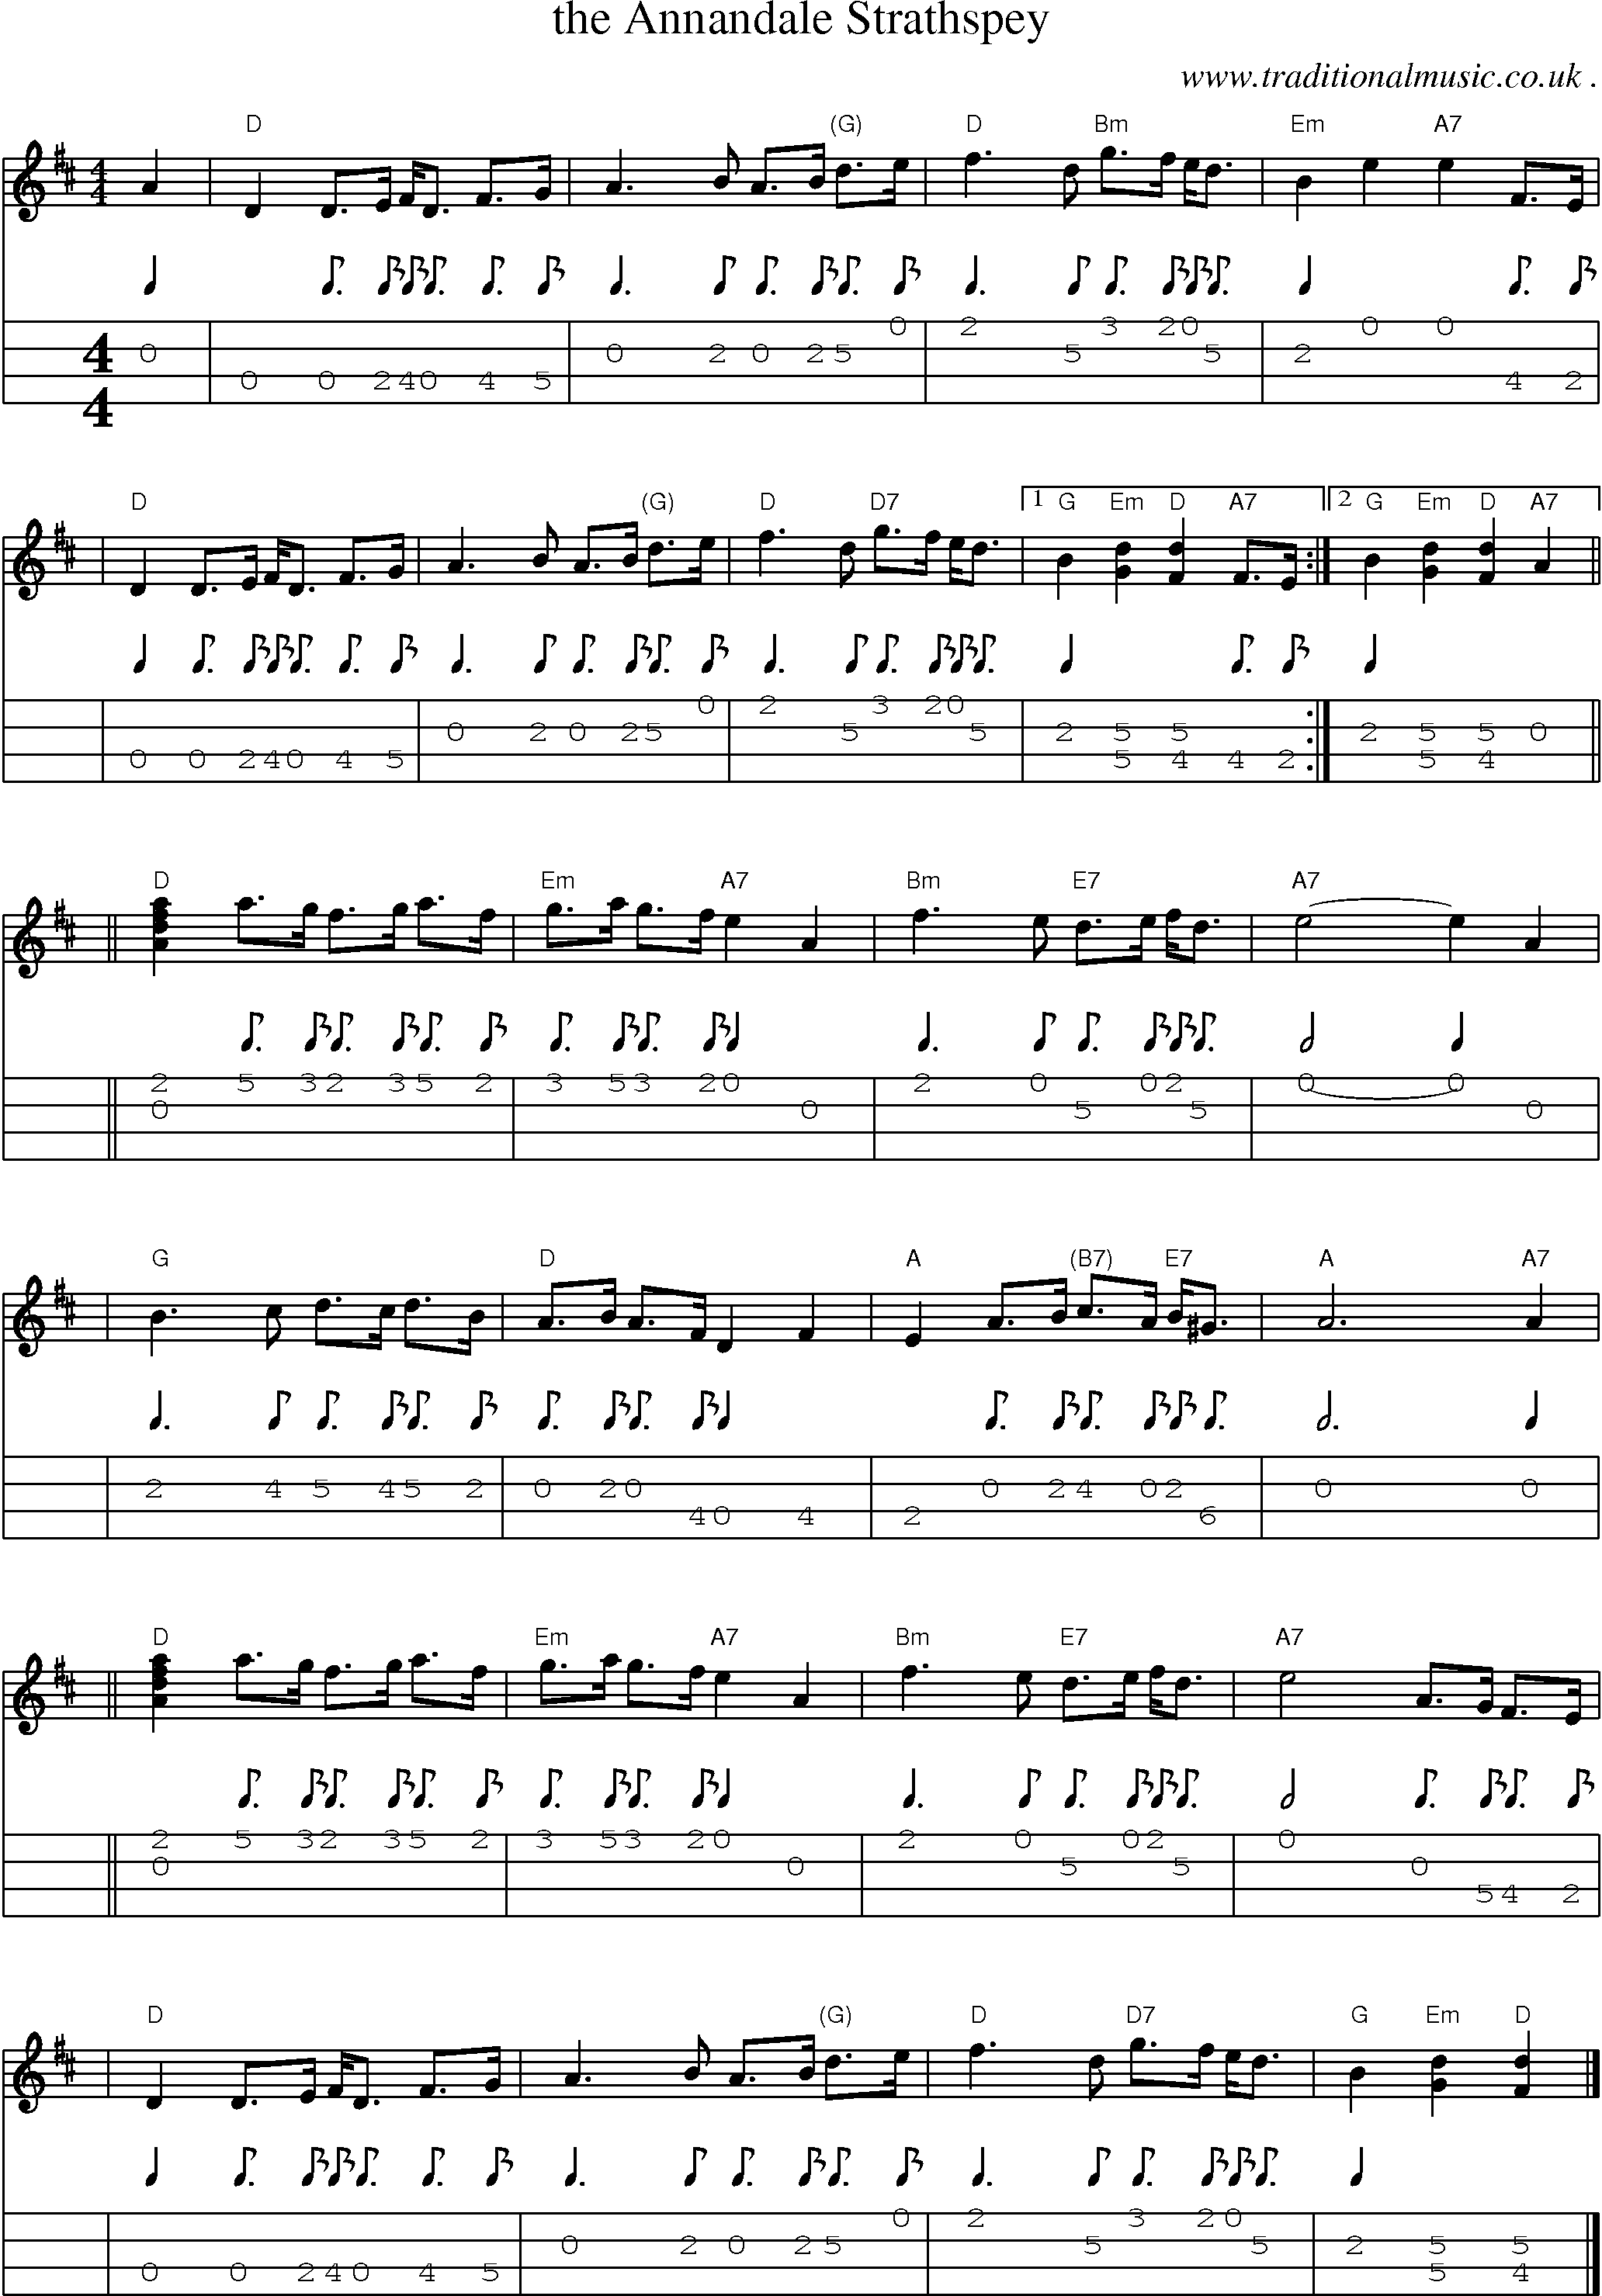 Sheet-music  score, Chords and Mandolin Tabs for The Annandale Strathspey